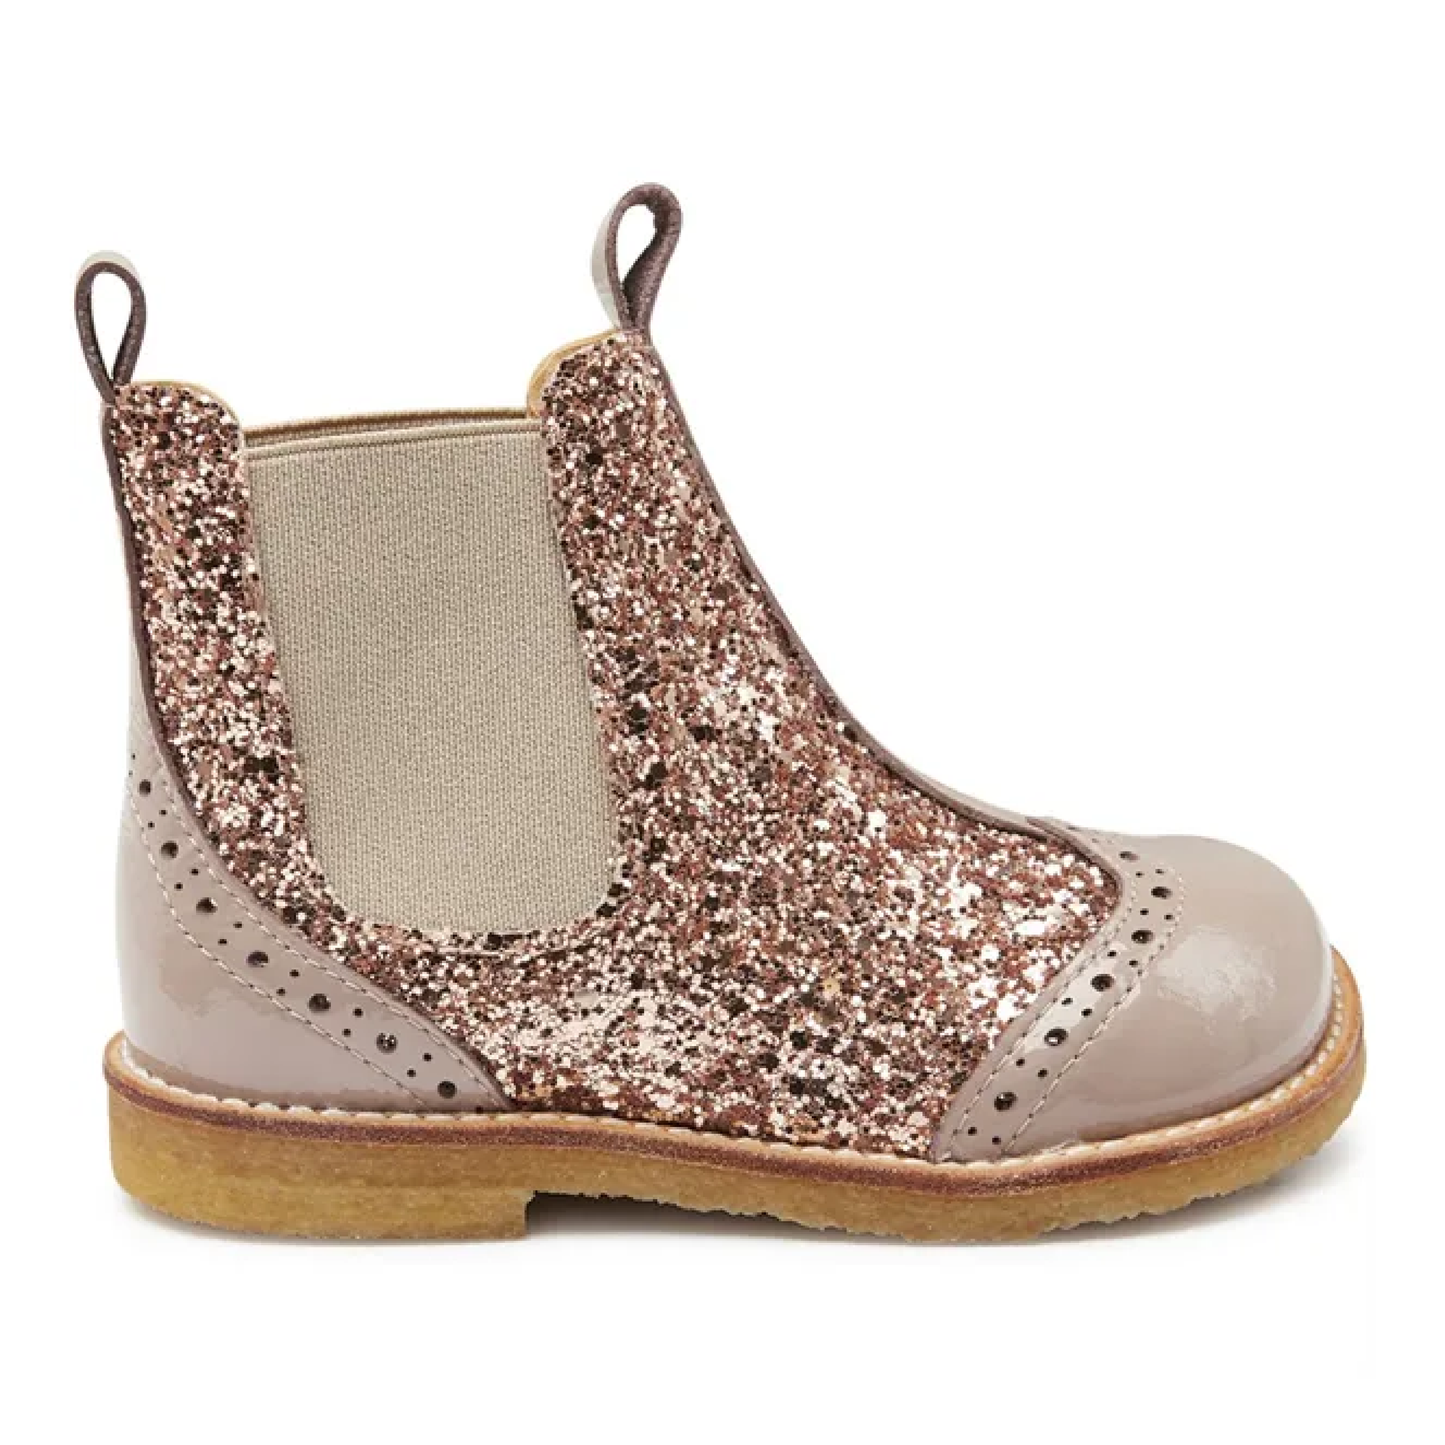 Chelsea Boot With Glitter, Dusty Almond